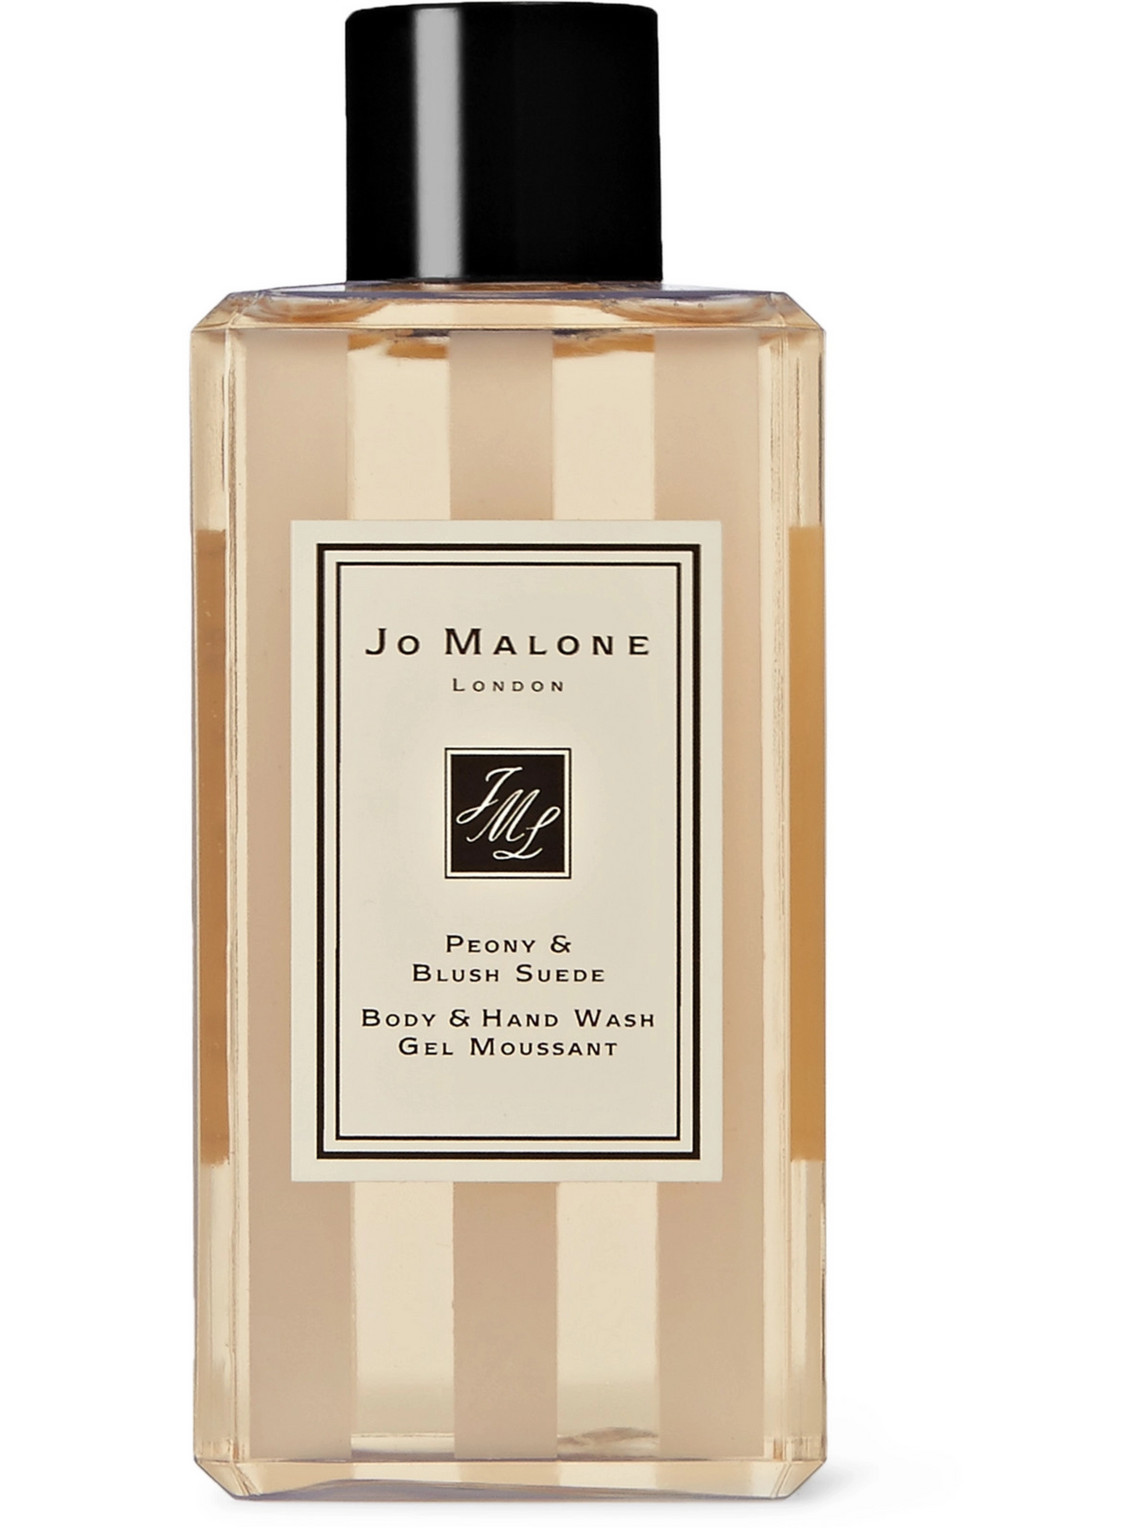 Jo Malone London Peony And Blush Suede Body & Hand Wash, 100ml In Colorless